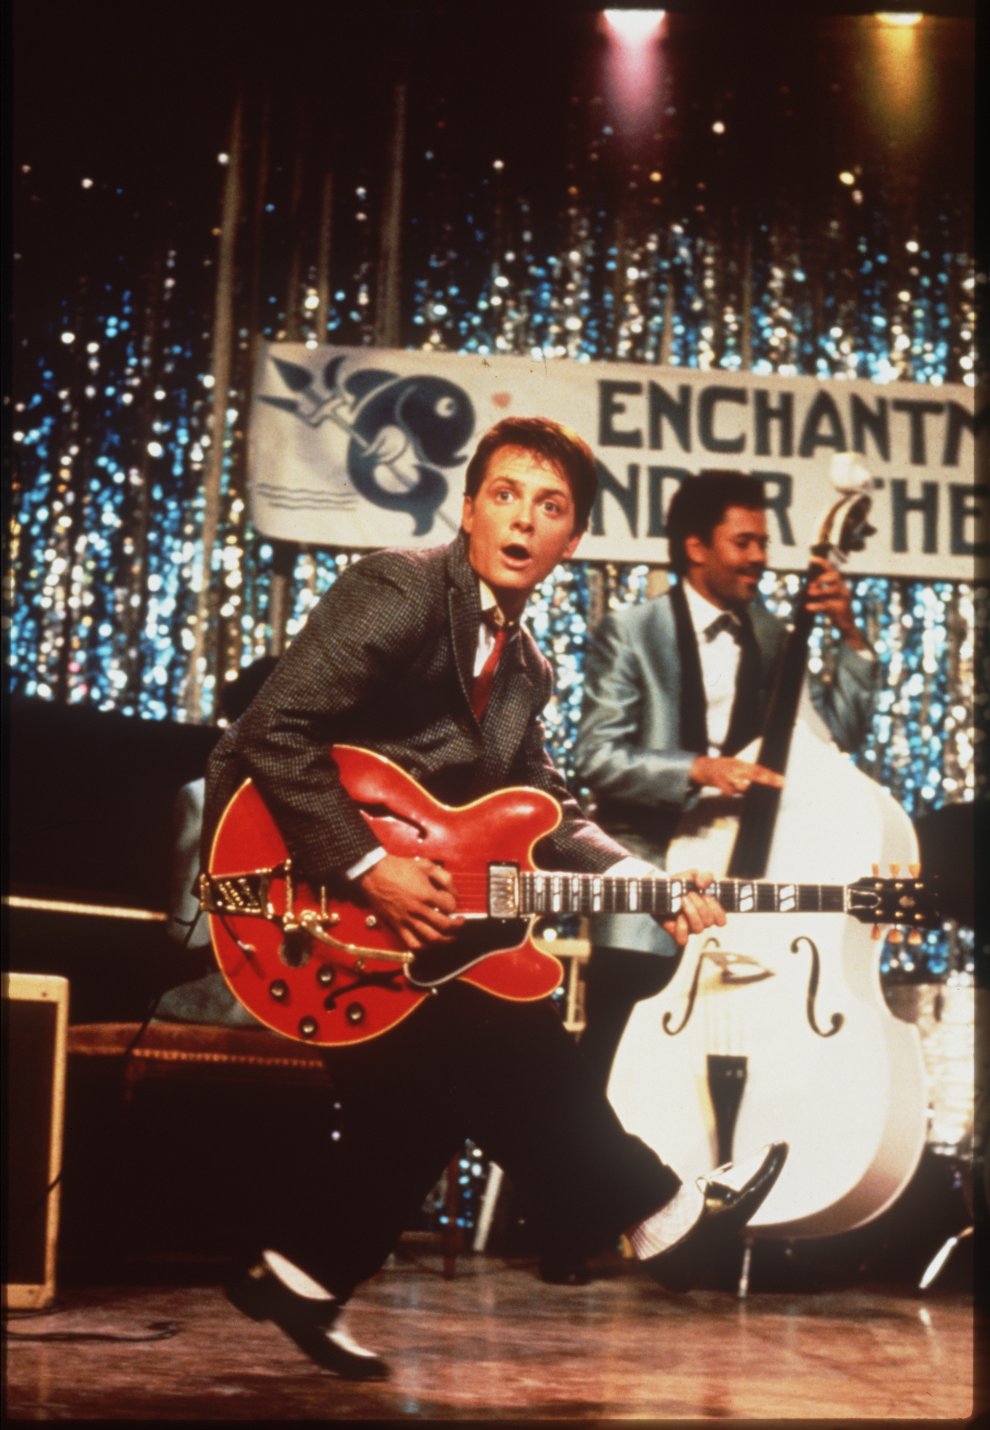 Michael as Marty doing the ‘Chuck Berry riff’ in the movie